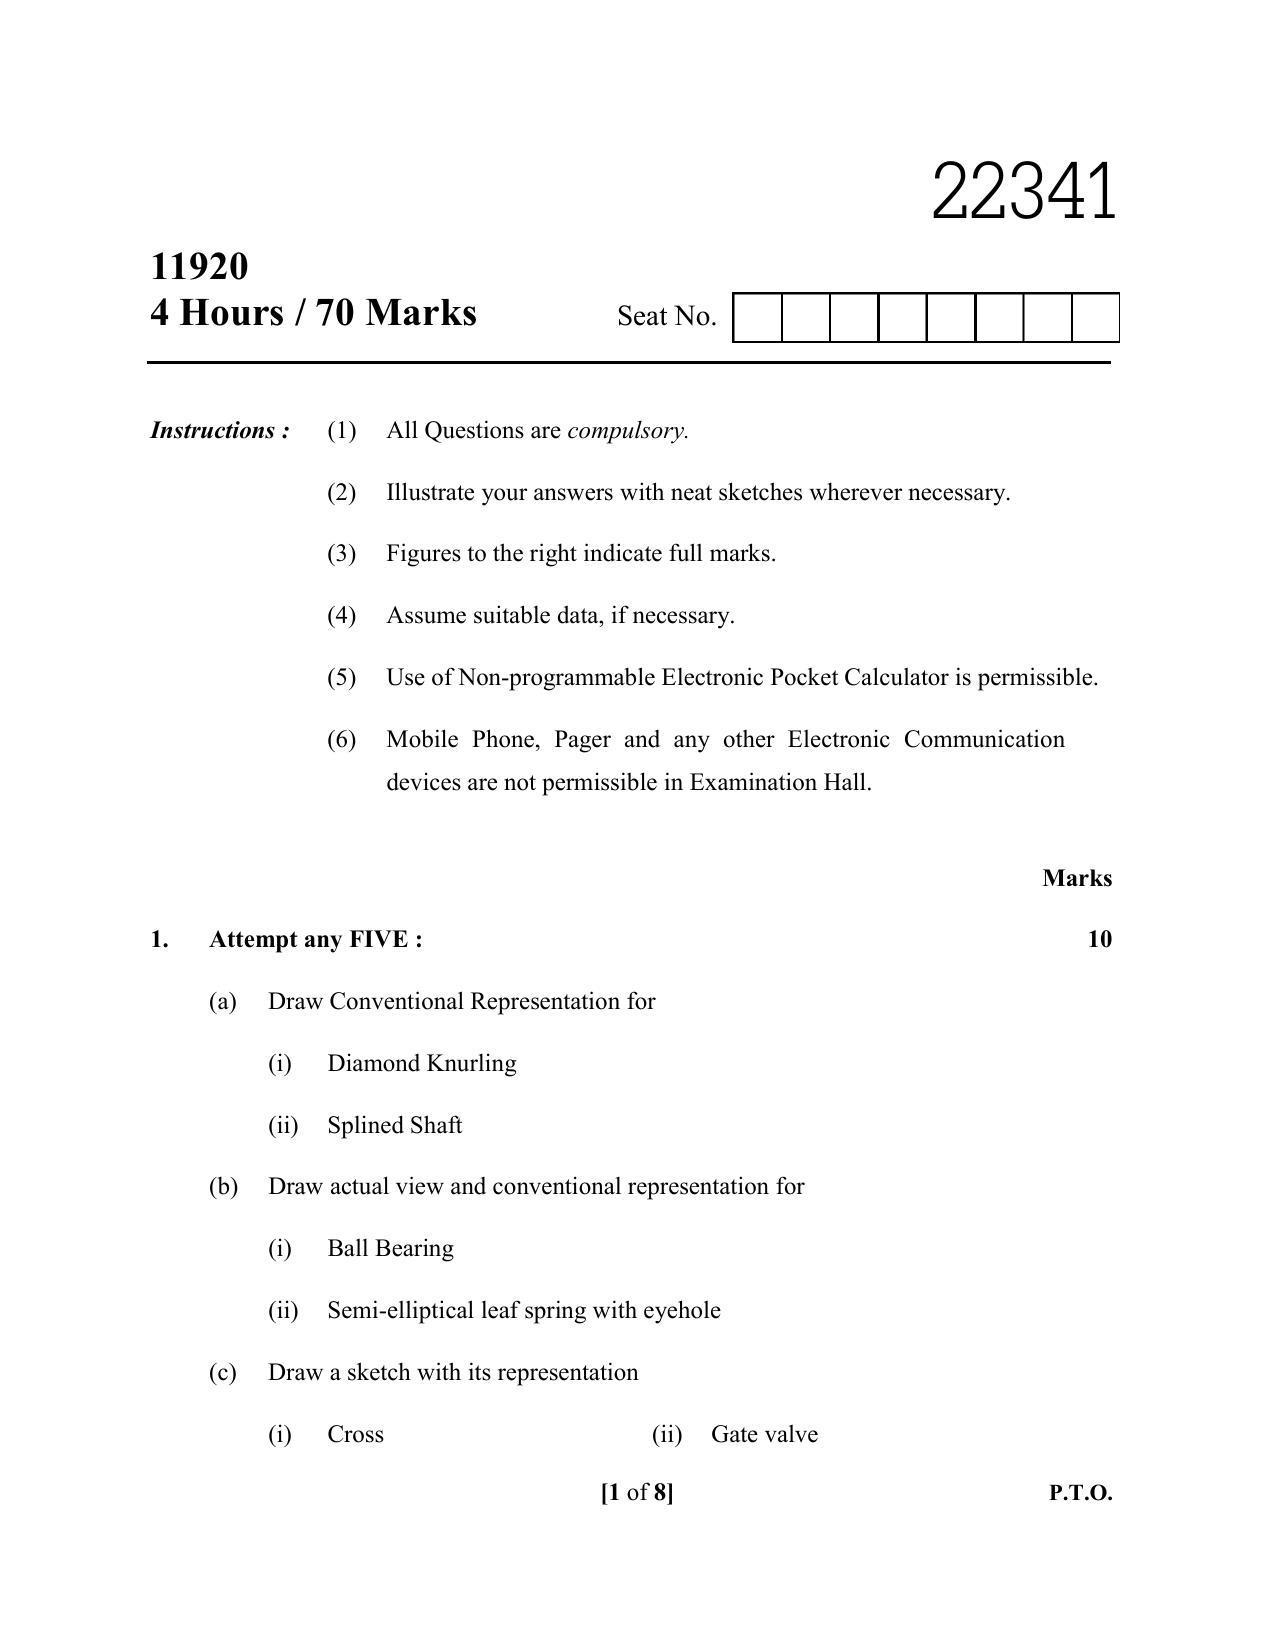 MSBTE Question Paper - 2019 - Mechanical working Drawing - Page 1